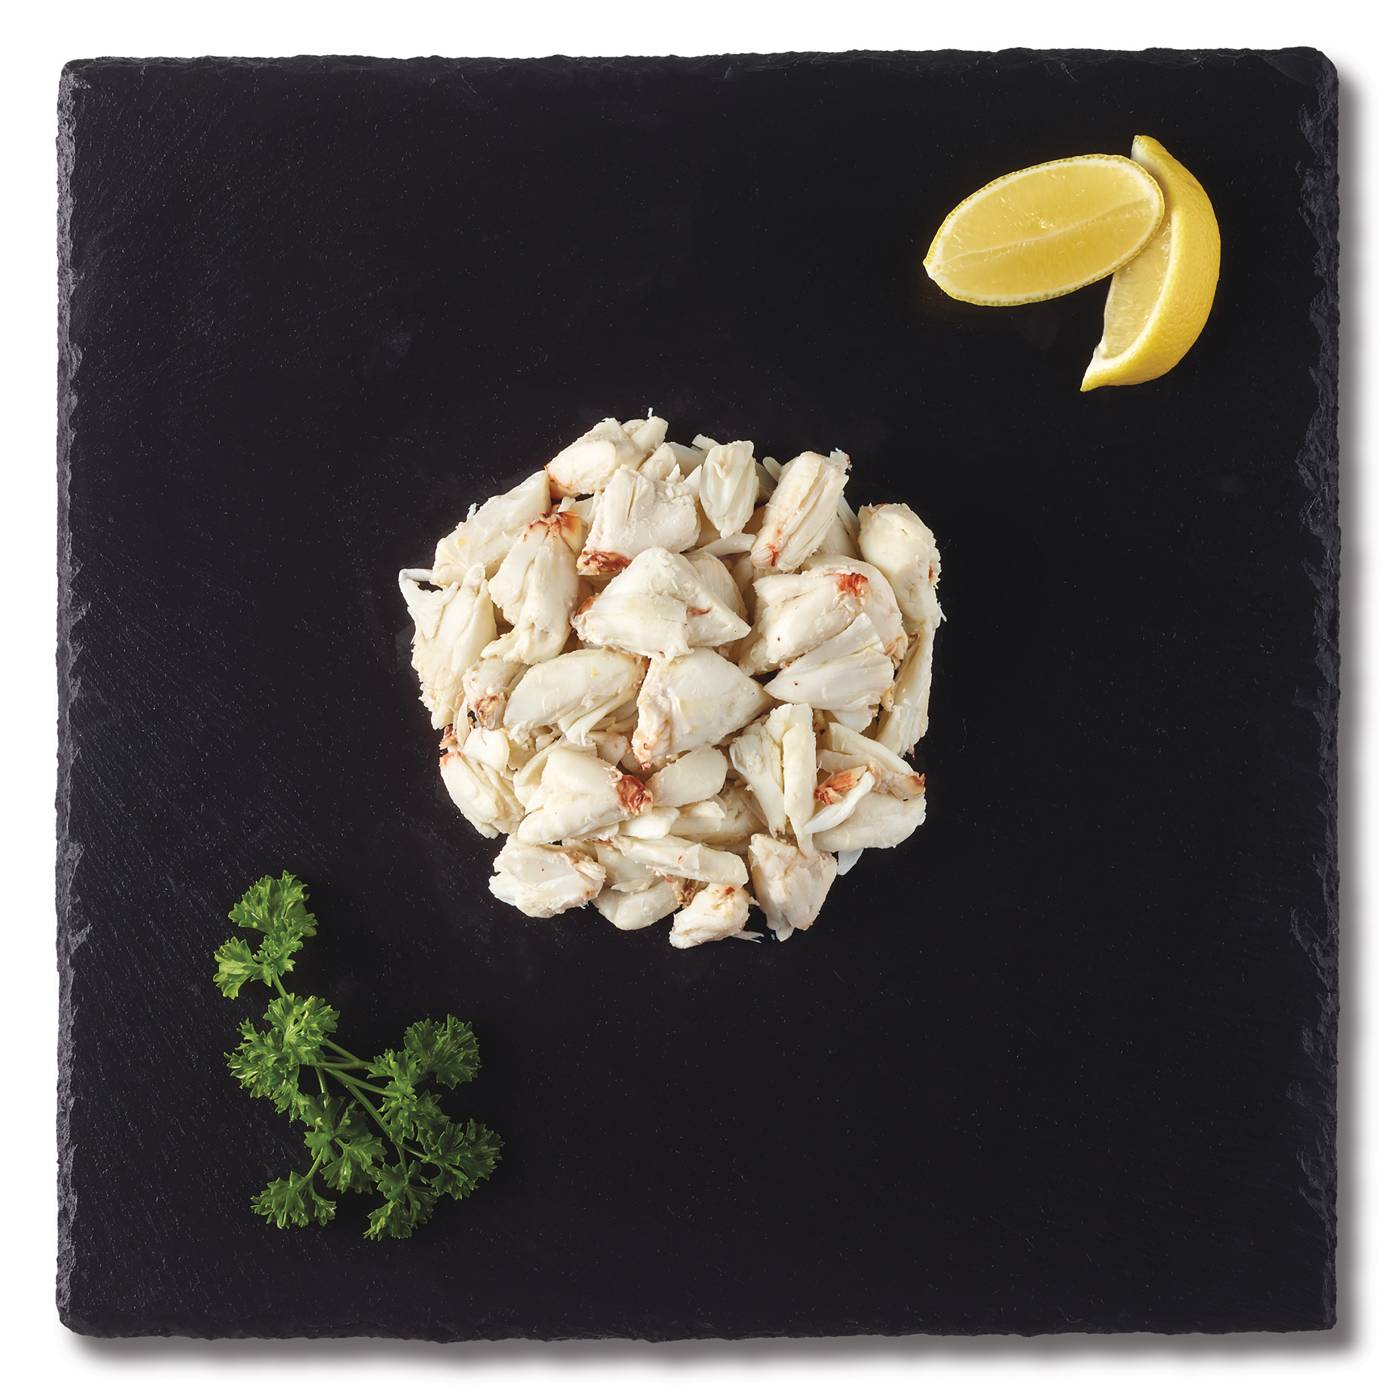 Refrigerated Jumbo Lump Crab Meat; image 2 of 2